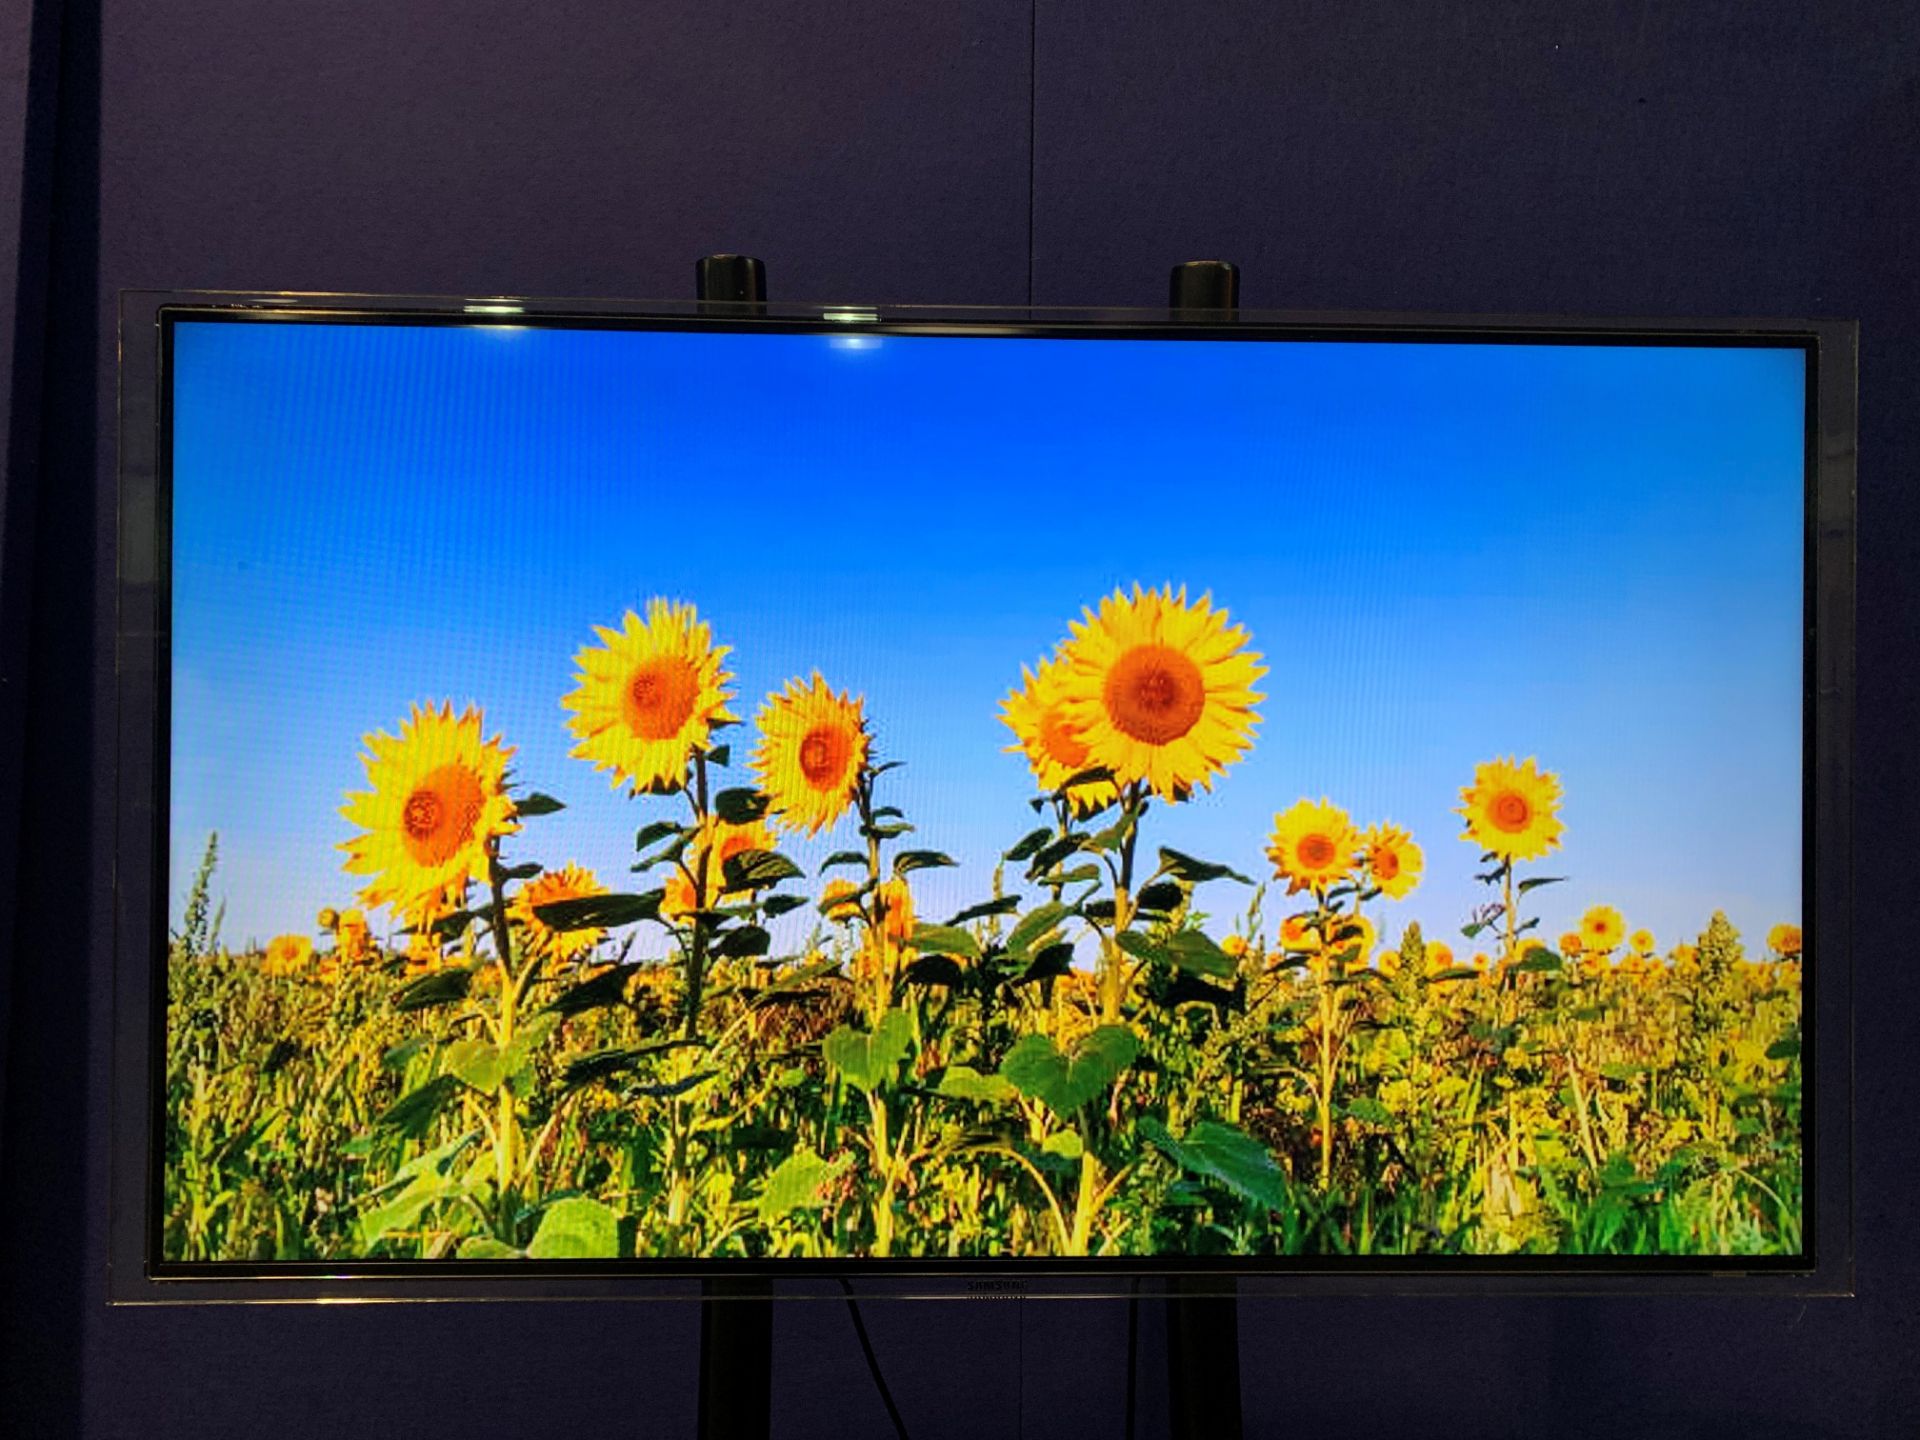 Samsung 46" 1920 X 1080 LED Screen with Wall Mount, IEC and Remote Control,3 x HDMI,USB. Model